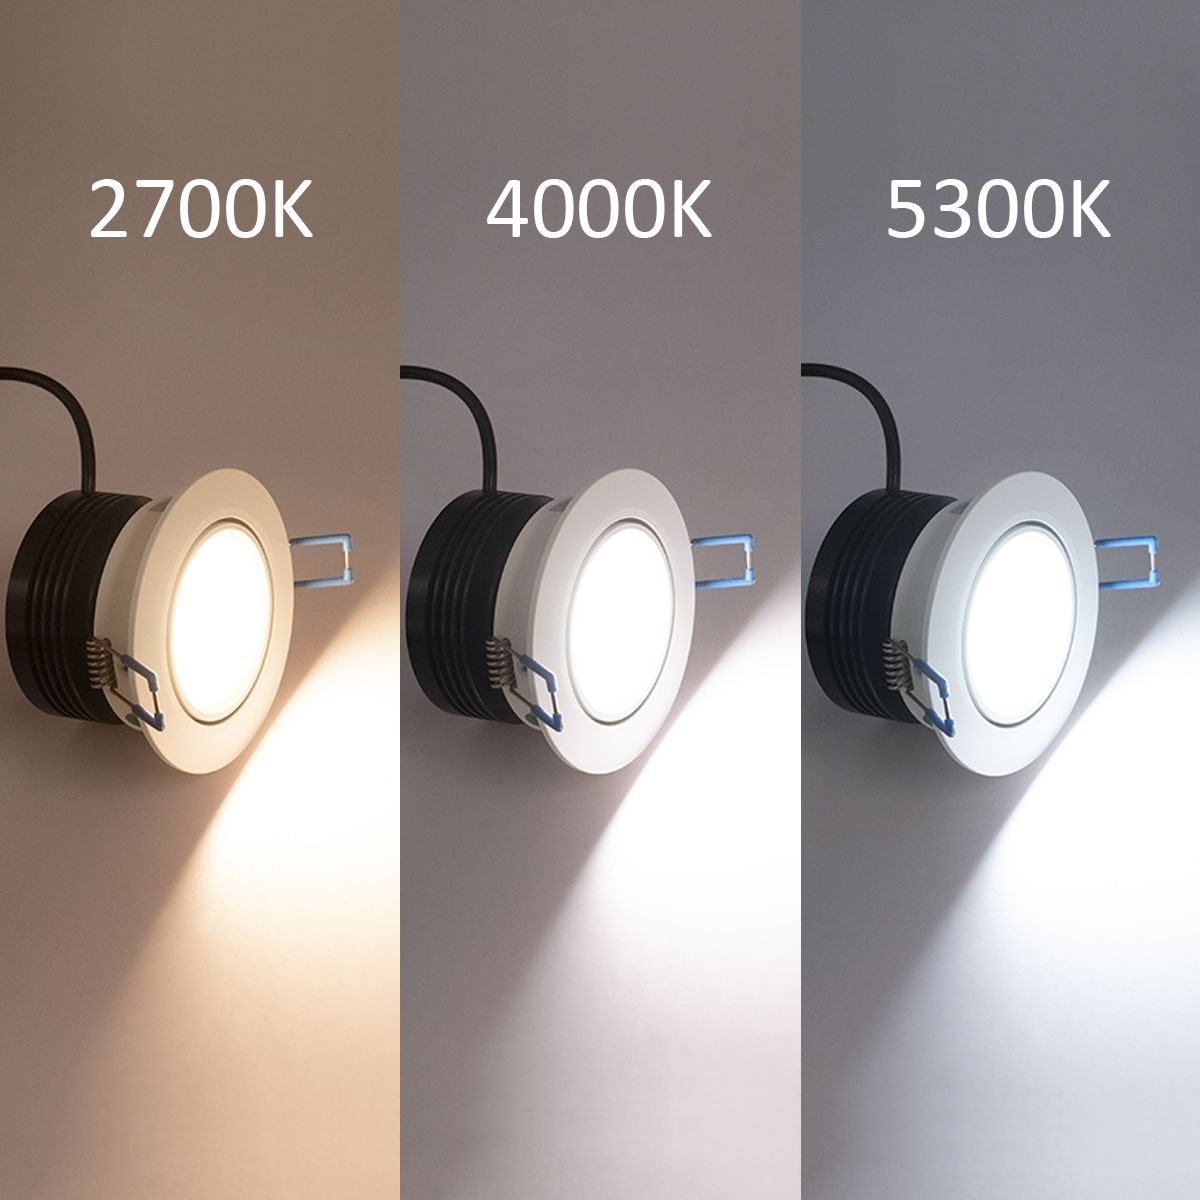 Energy-Efficient LED Lights by Finnish Company - Illuminate Your Space